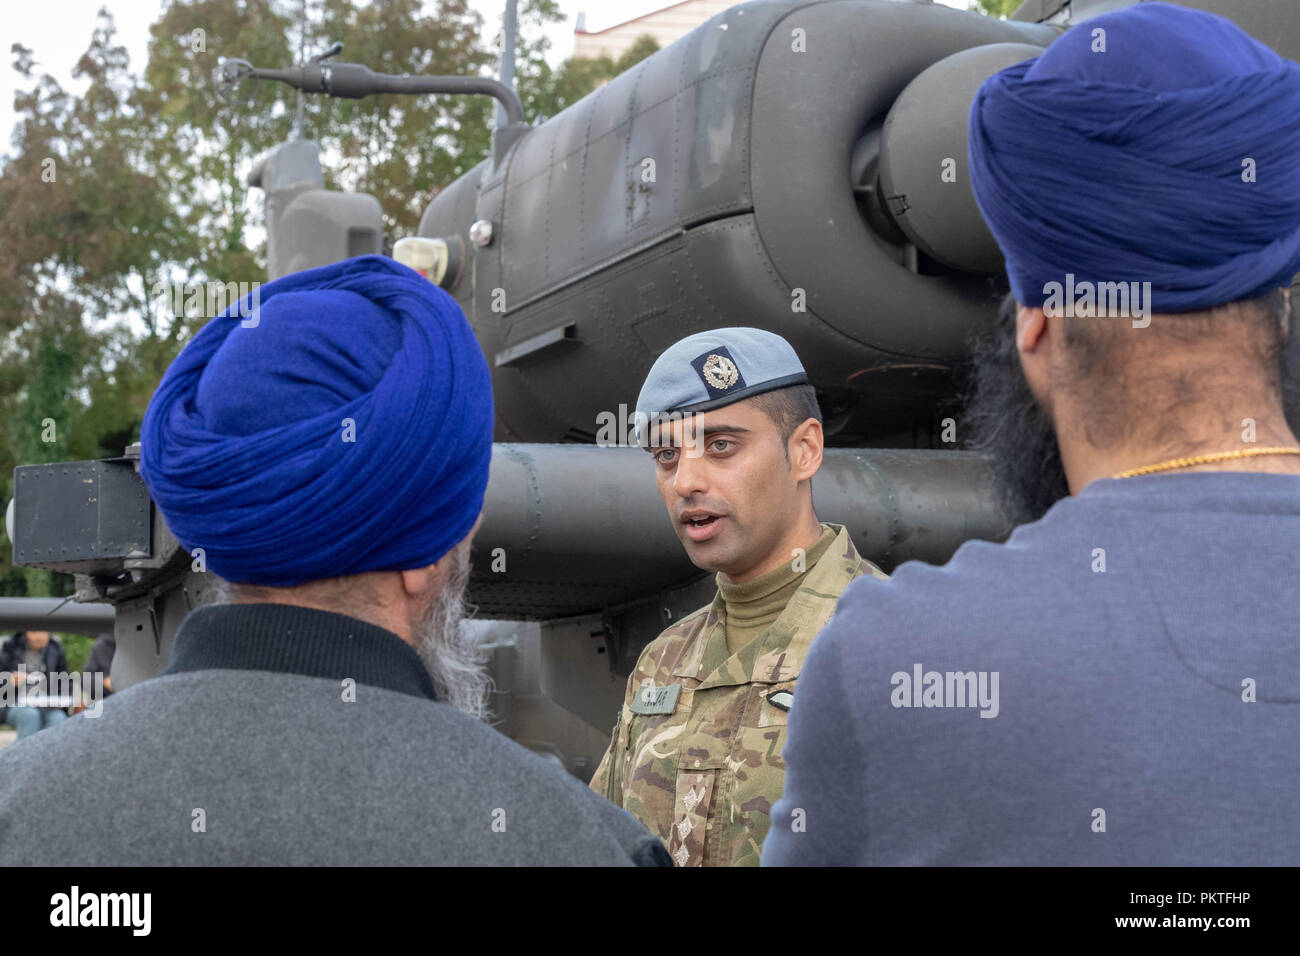 London 15th September 2018 UK Army open day to mark annual Saragarhi Commemorations This celebrates an epic battle where 21 Sikh soldiers took a last stand against 10,000 enemy tribesmen in 1897   An army air corp apache attack helicopter pilot talks to some sikh  visitors next to his helicopter Credit Ian Davidson/Alamy Live News Stock Photo